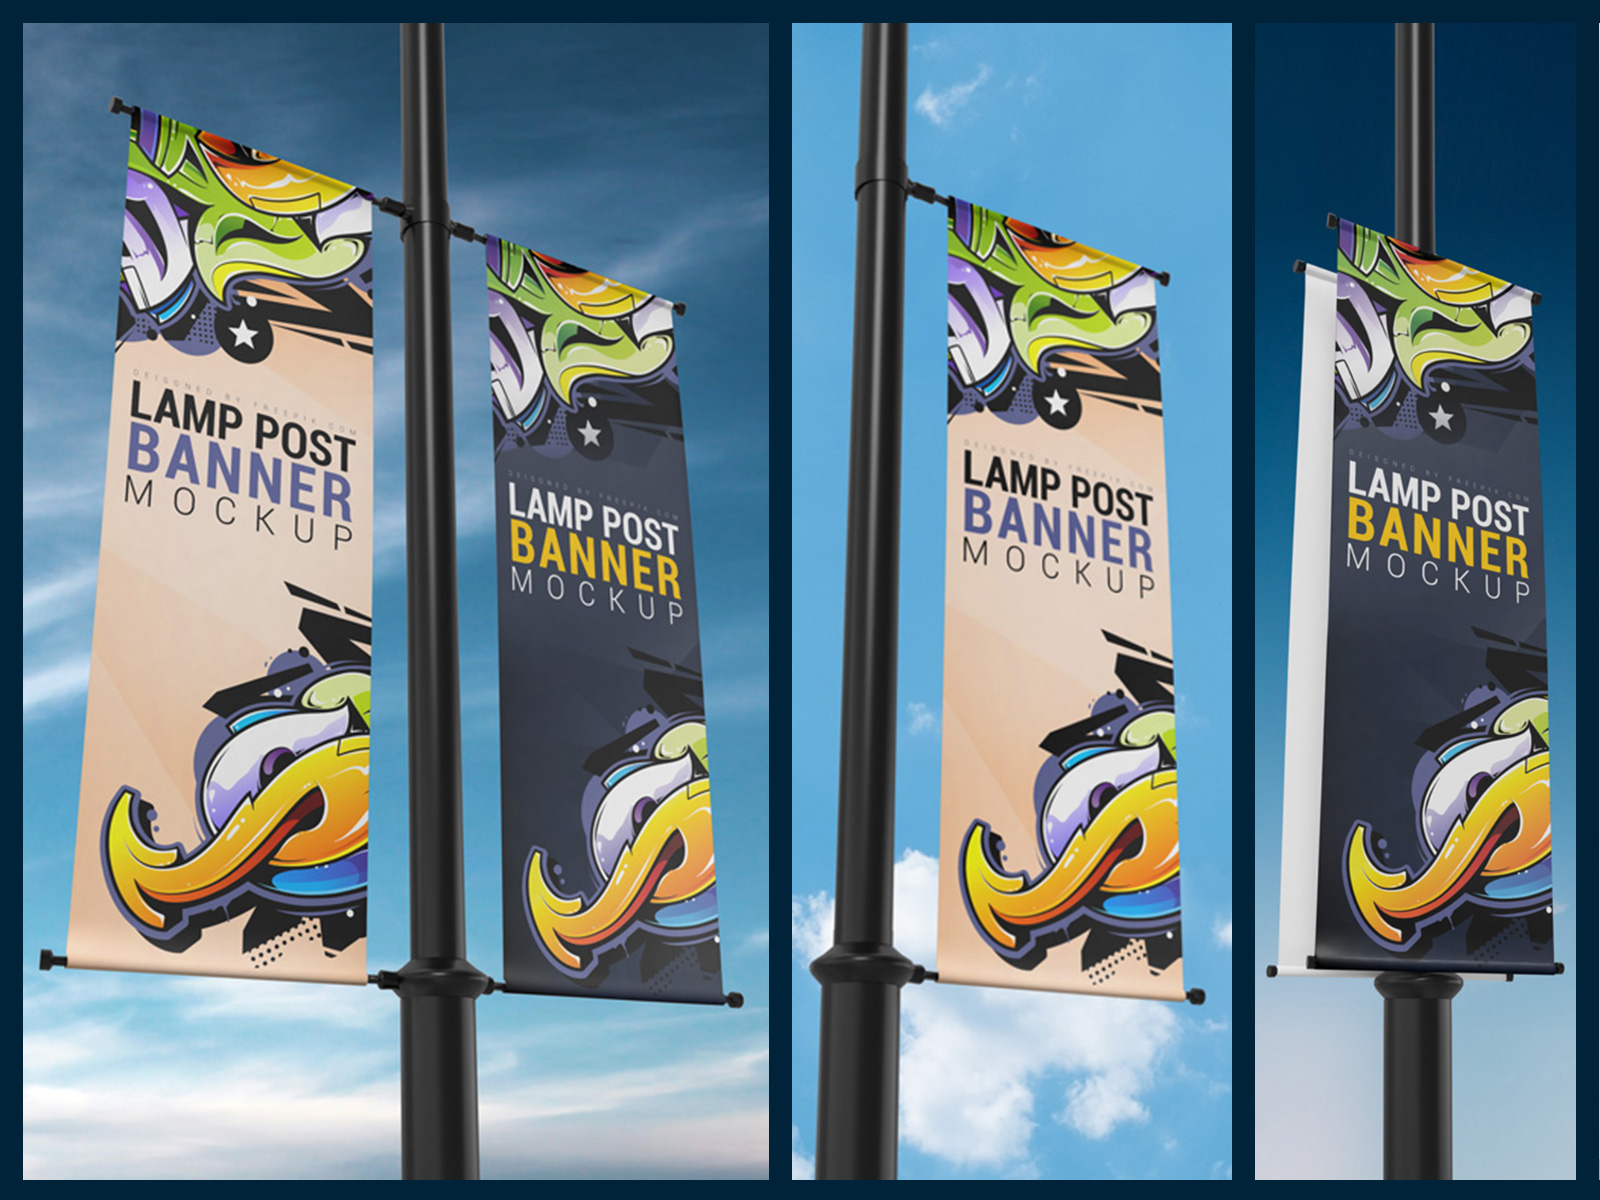 Download Lamp Post Banner Mockup In 3 Types By Mostafa Absalan On Dribbble PSD Mockup Templates